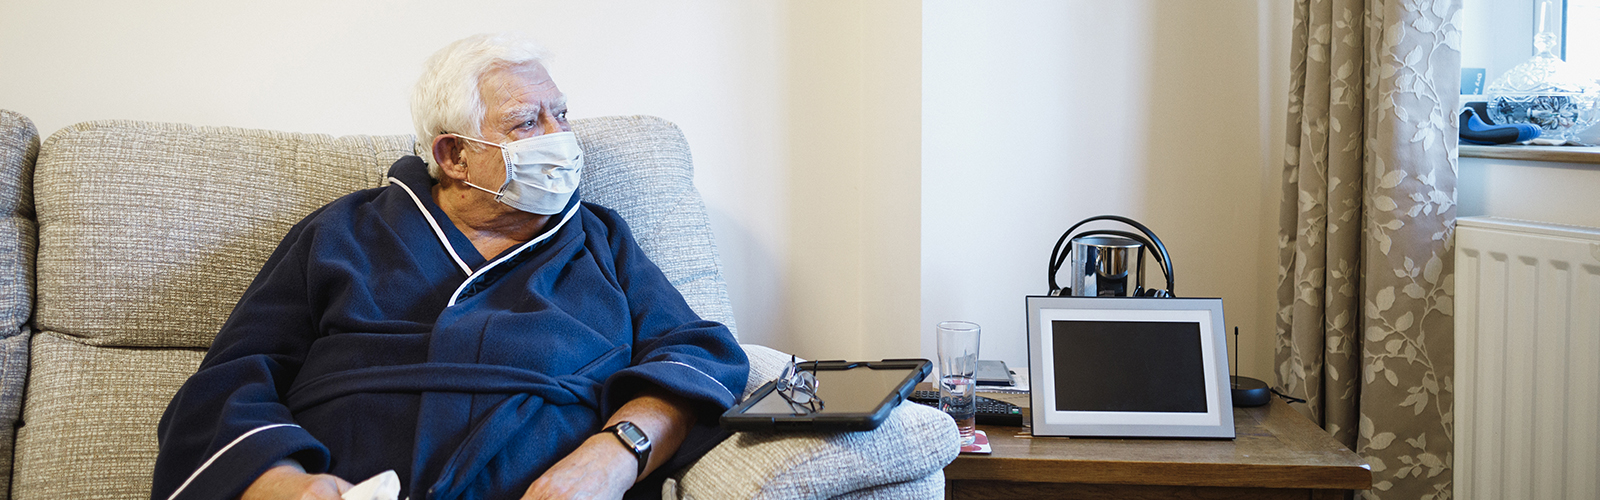 An older man, sat on a sofa and wearing a protective face mask